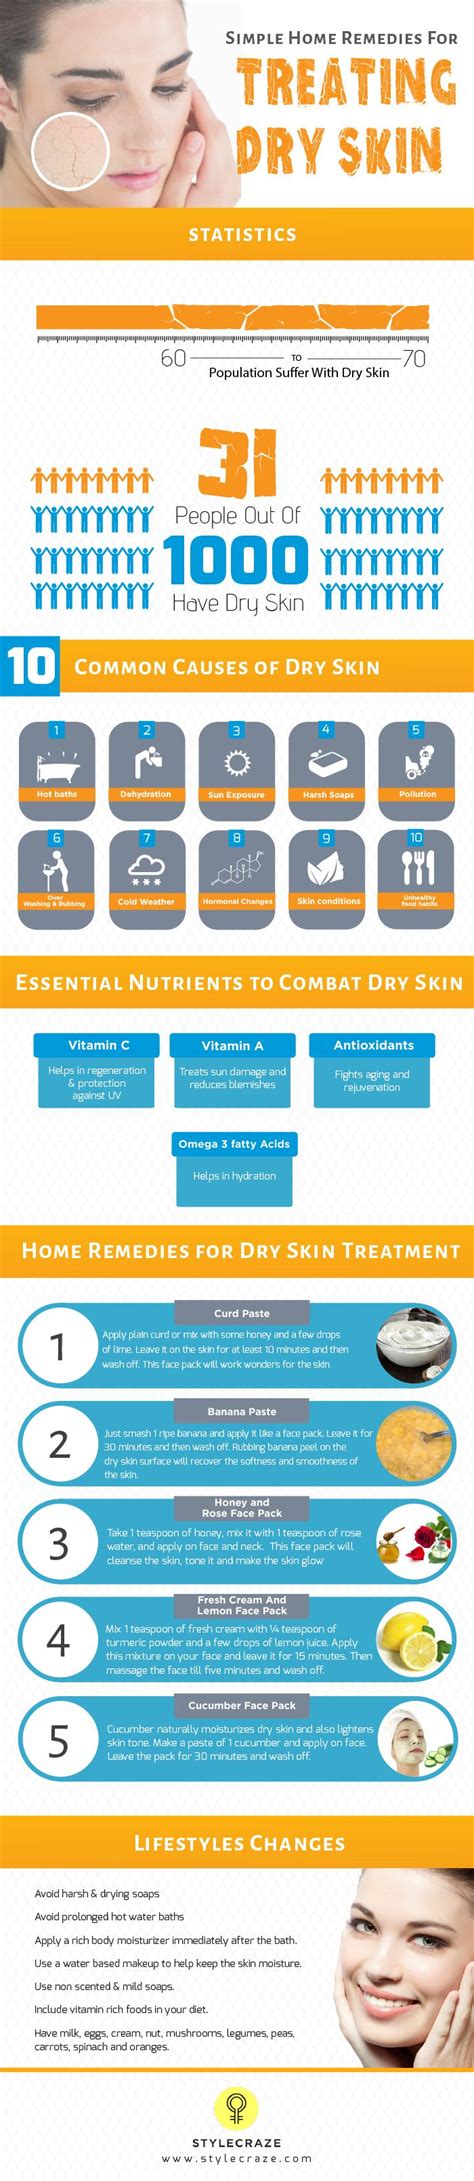 38 Home Remedies To Get Rid Of Dry Skin On The Face Treating Dry Skin